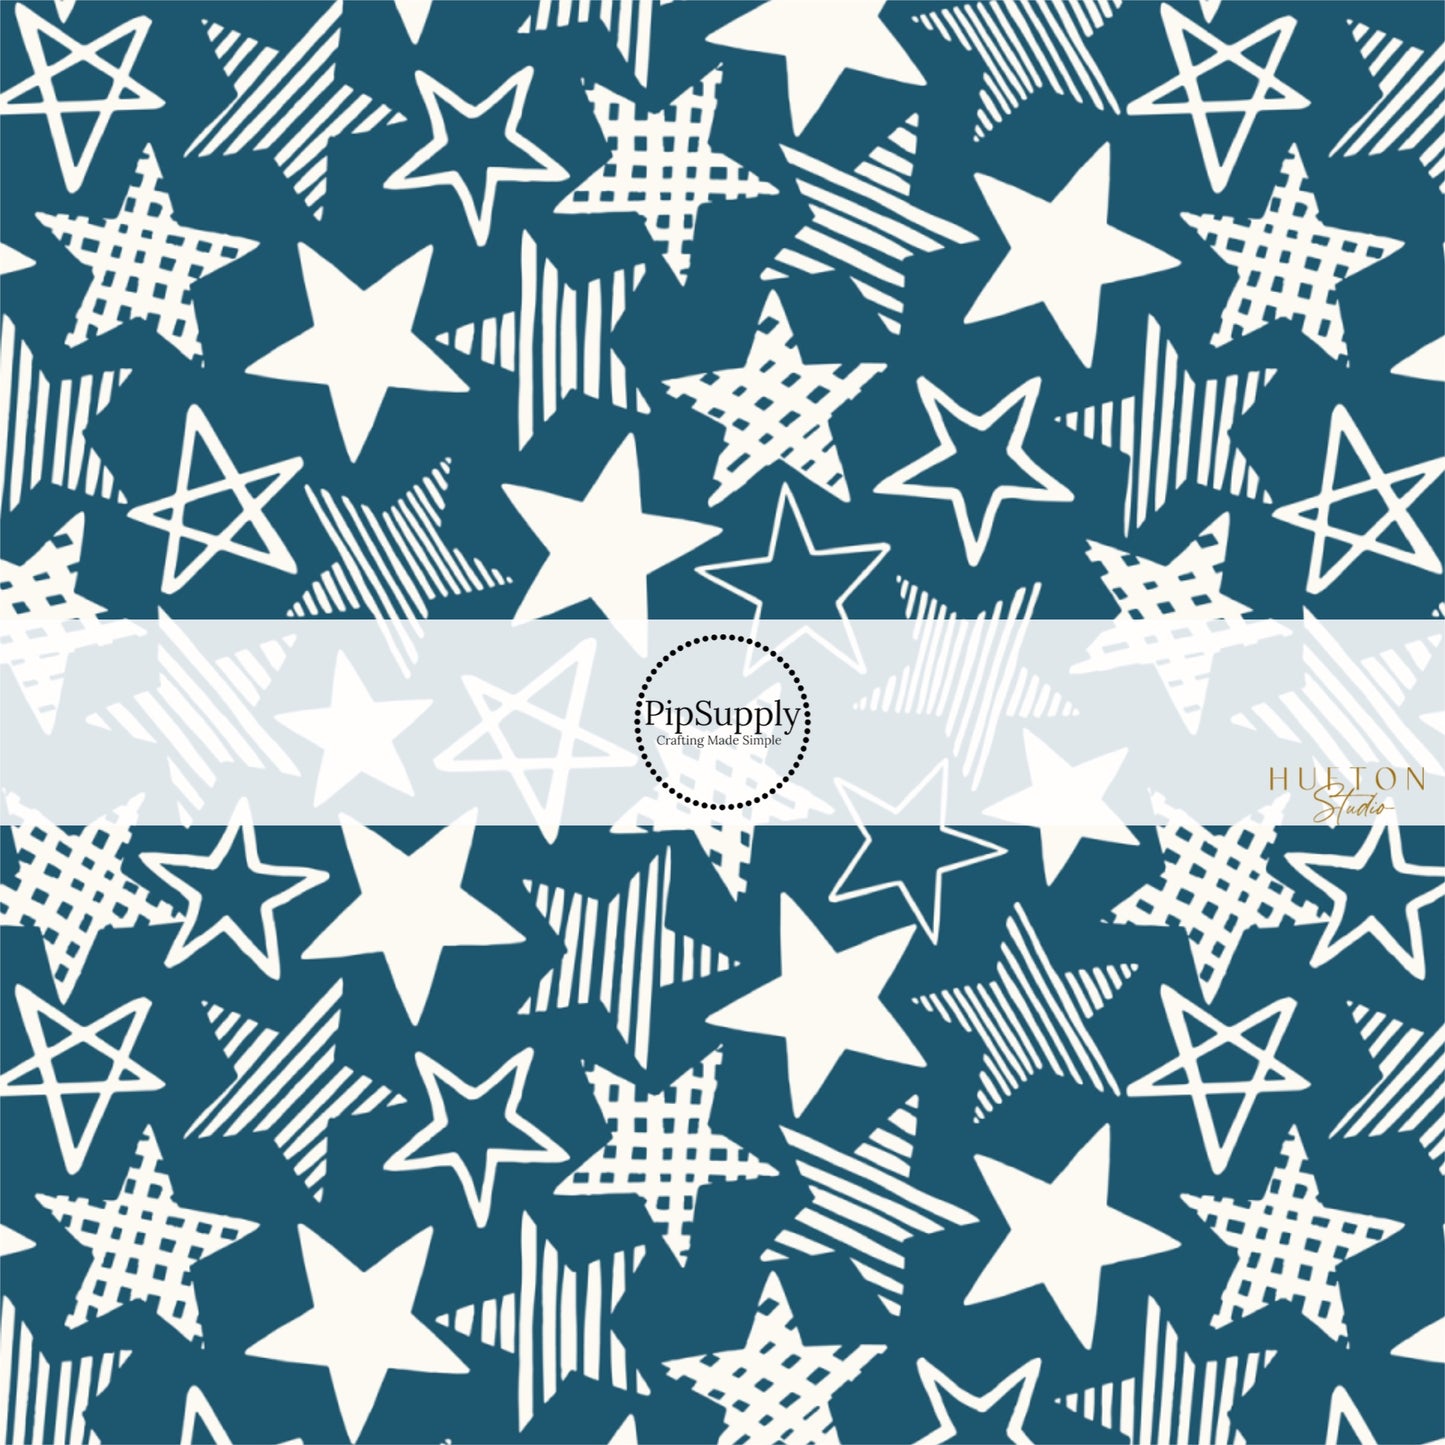 This 4th of July fabric by the yard features patriotic white patterned stars on blue. This fun patriotic themed fabric can be used for all your sewing and crafting needs!